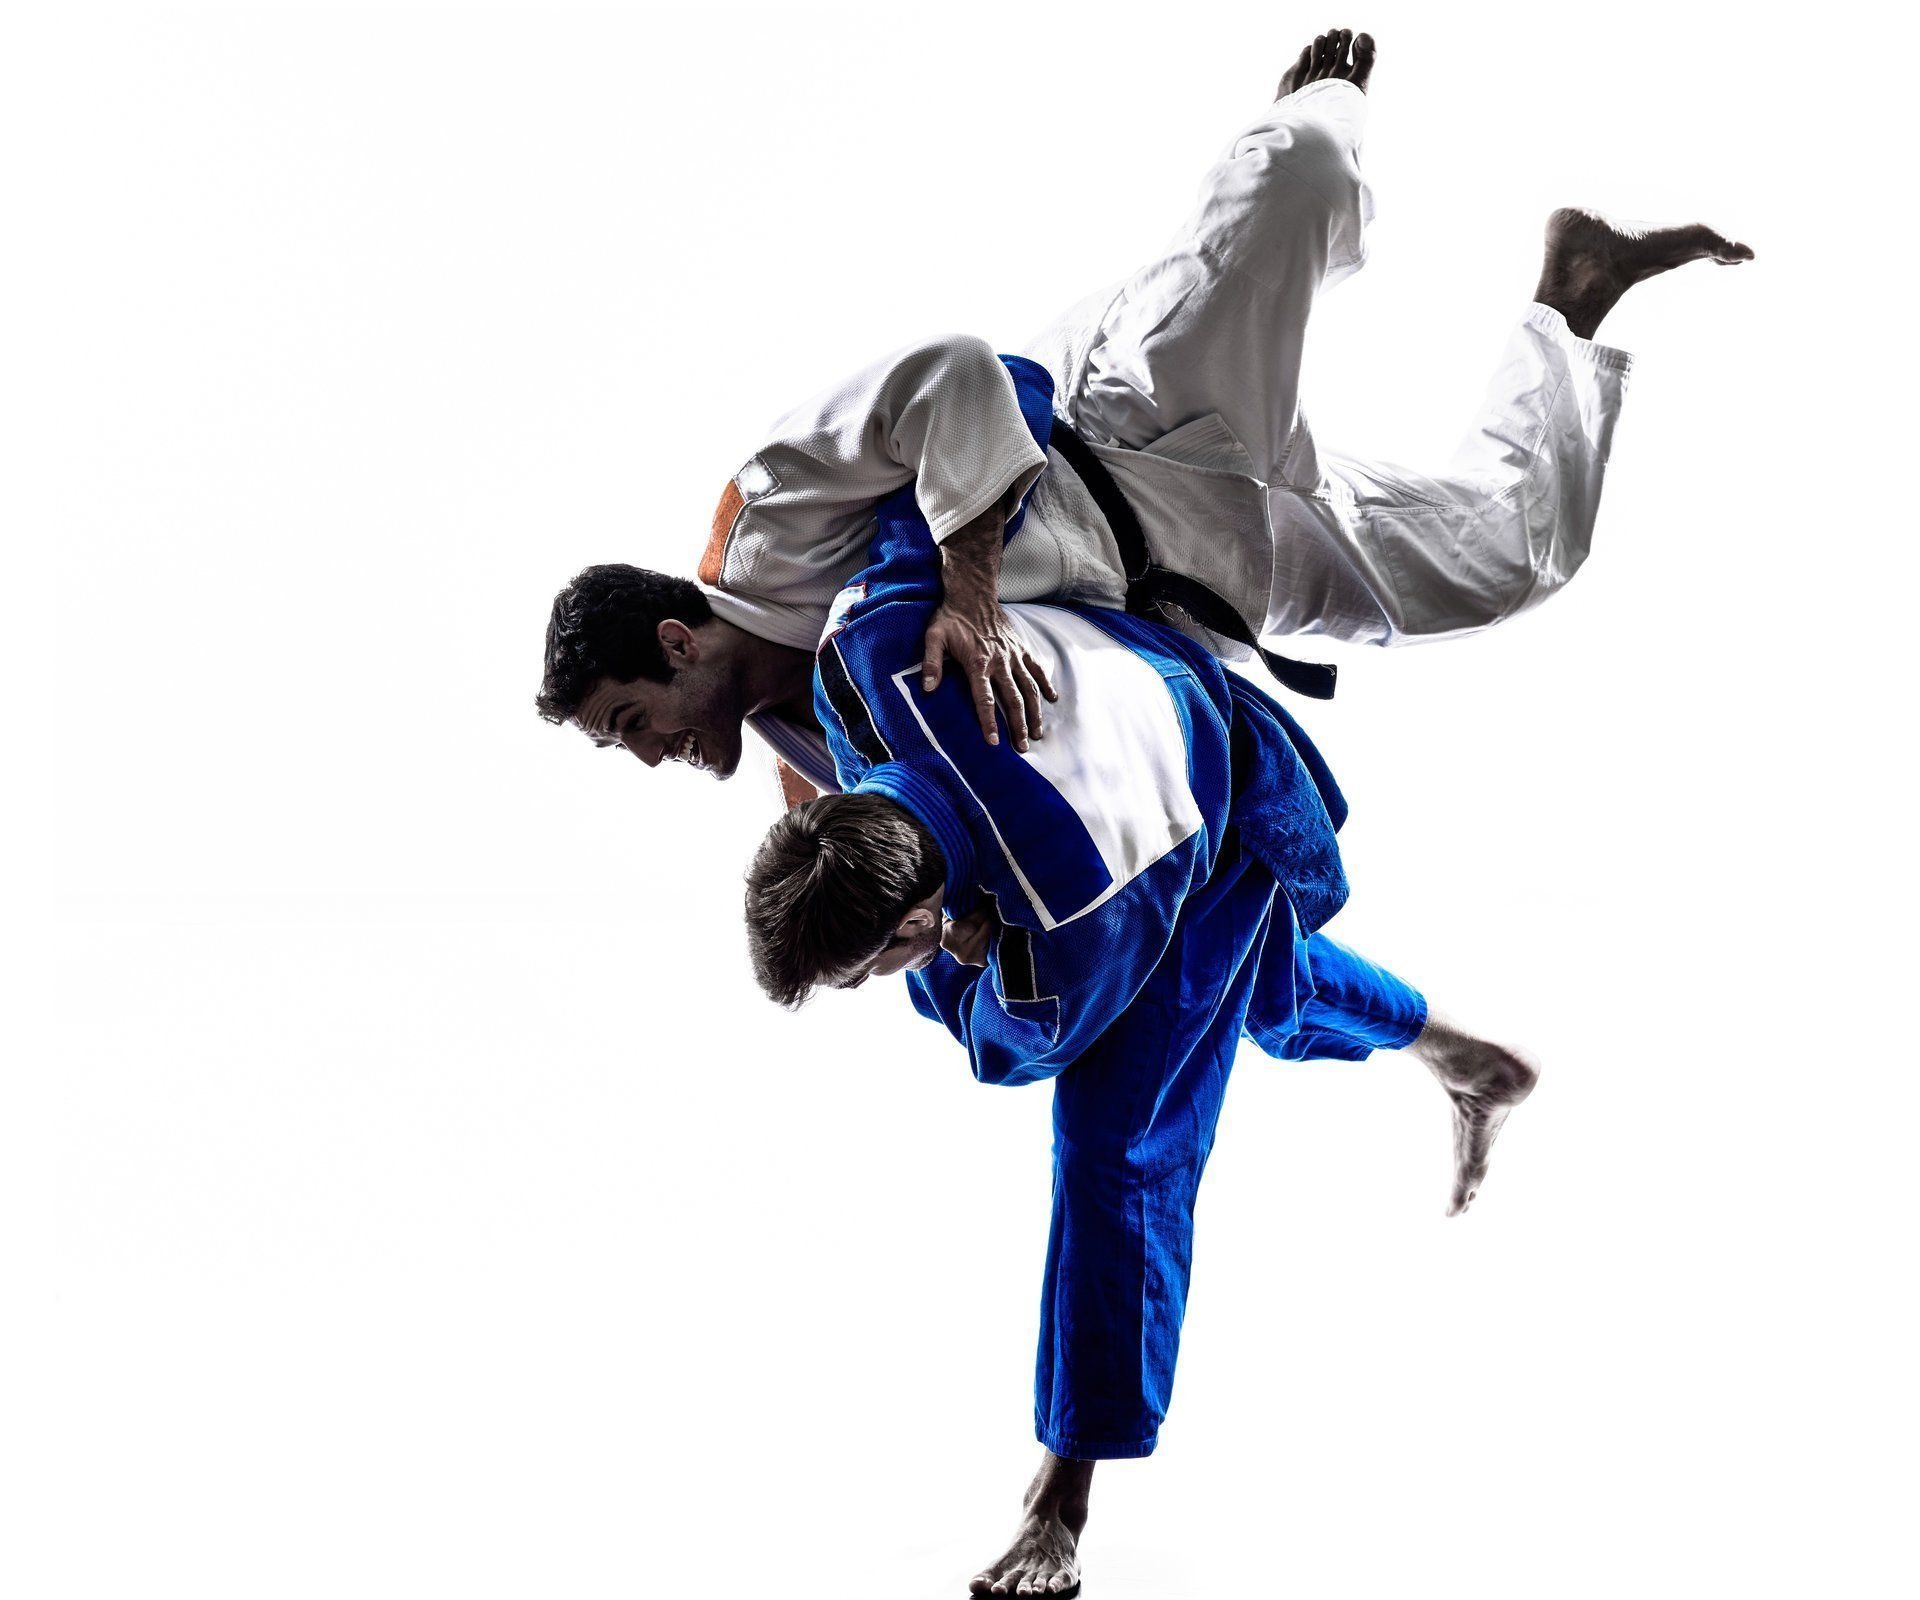 Judo: Nage-waza, Throwing techniques performed by World Class Martial Artists, Competitive combat sports. 1920x1600 HD Background.